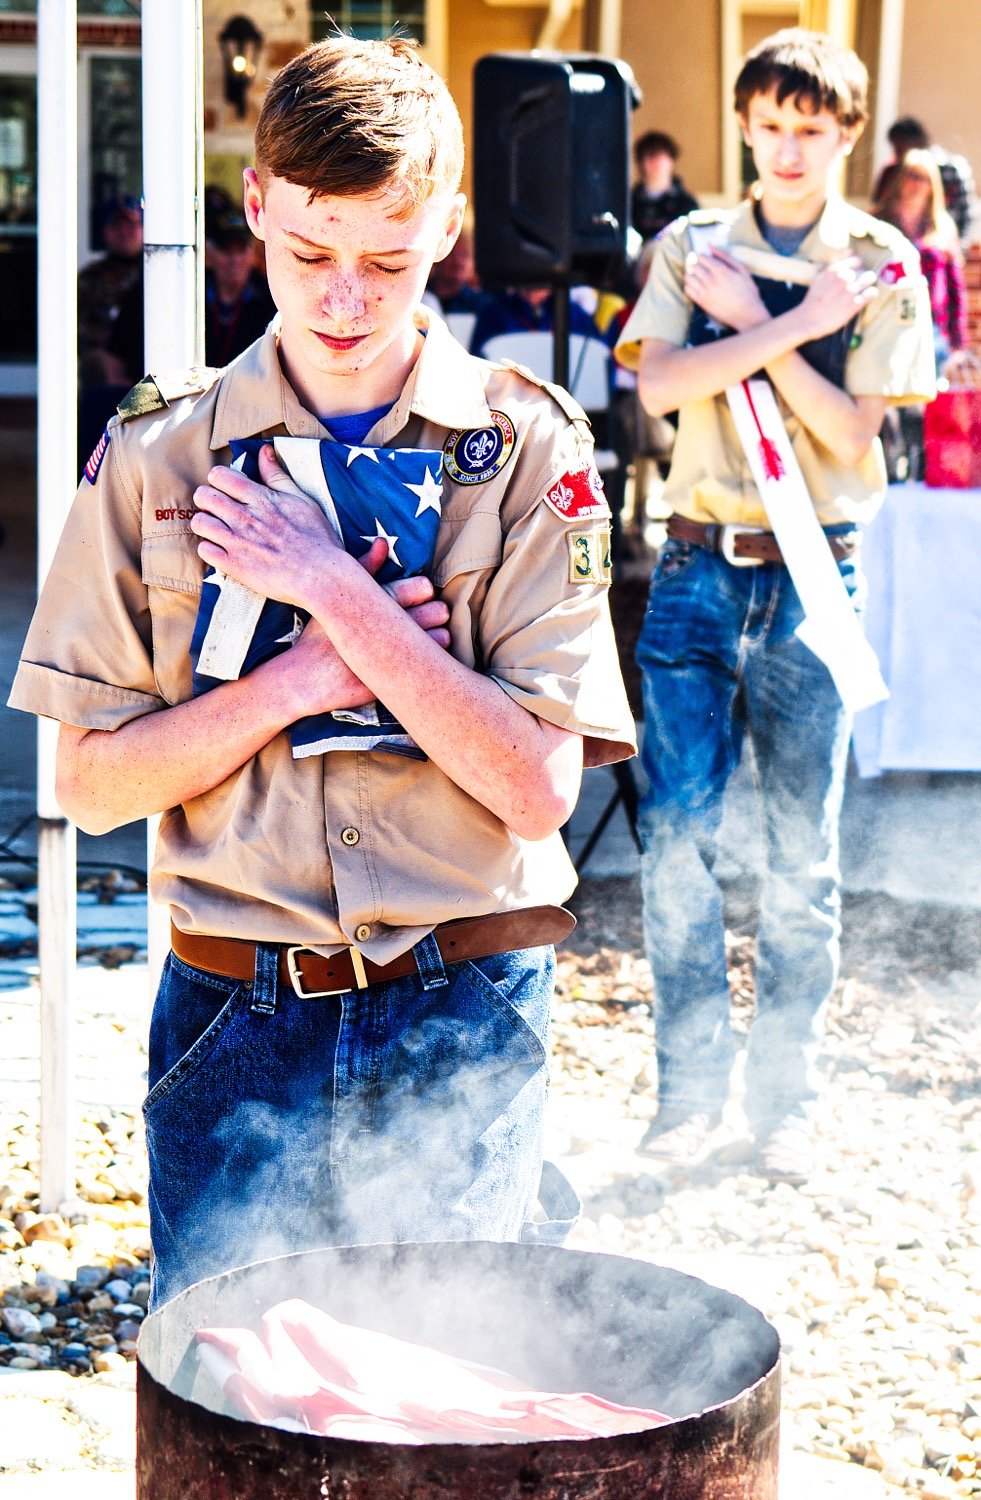 Scouts place American flags onto the pile for retirment as the smoky cylinder of symbols begins to burn.